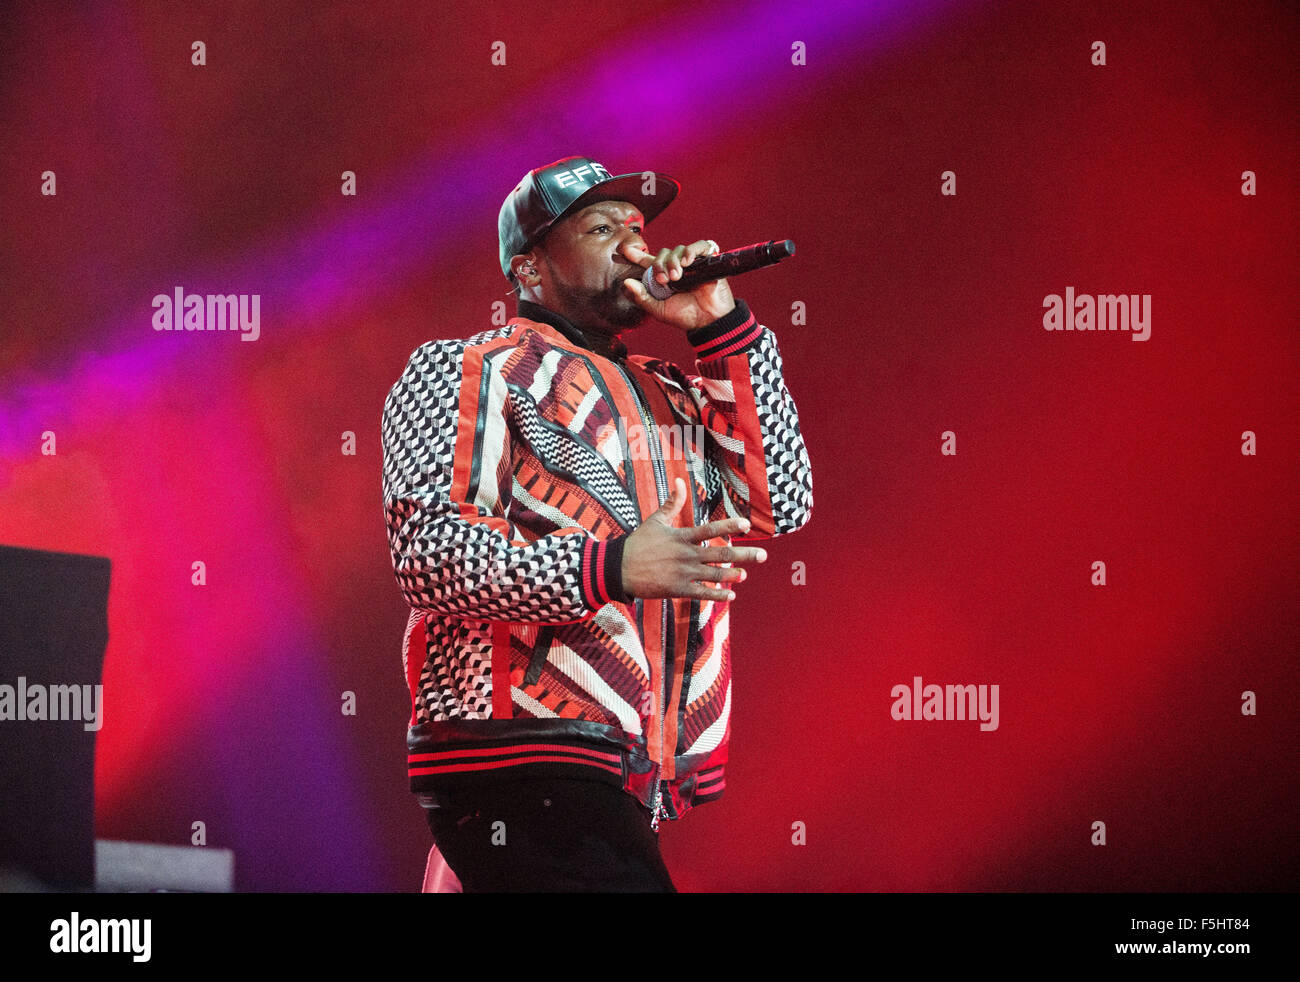 Glasgow, Scotland, UK. 4th November, 2015. Rapper CURTIS Jackson aka 50 Cent , performs at The SSE Hydro on November 4, 2015 in Glasgow, Scotland. Credit:  Sam Kovak/Alamy Live News Stock Photo